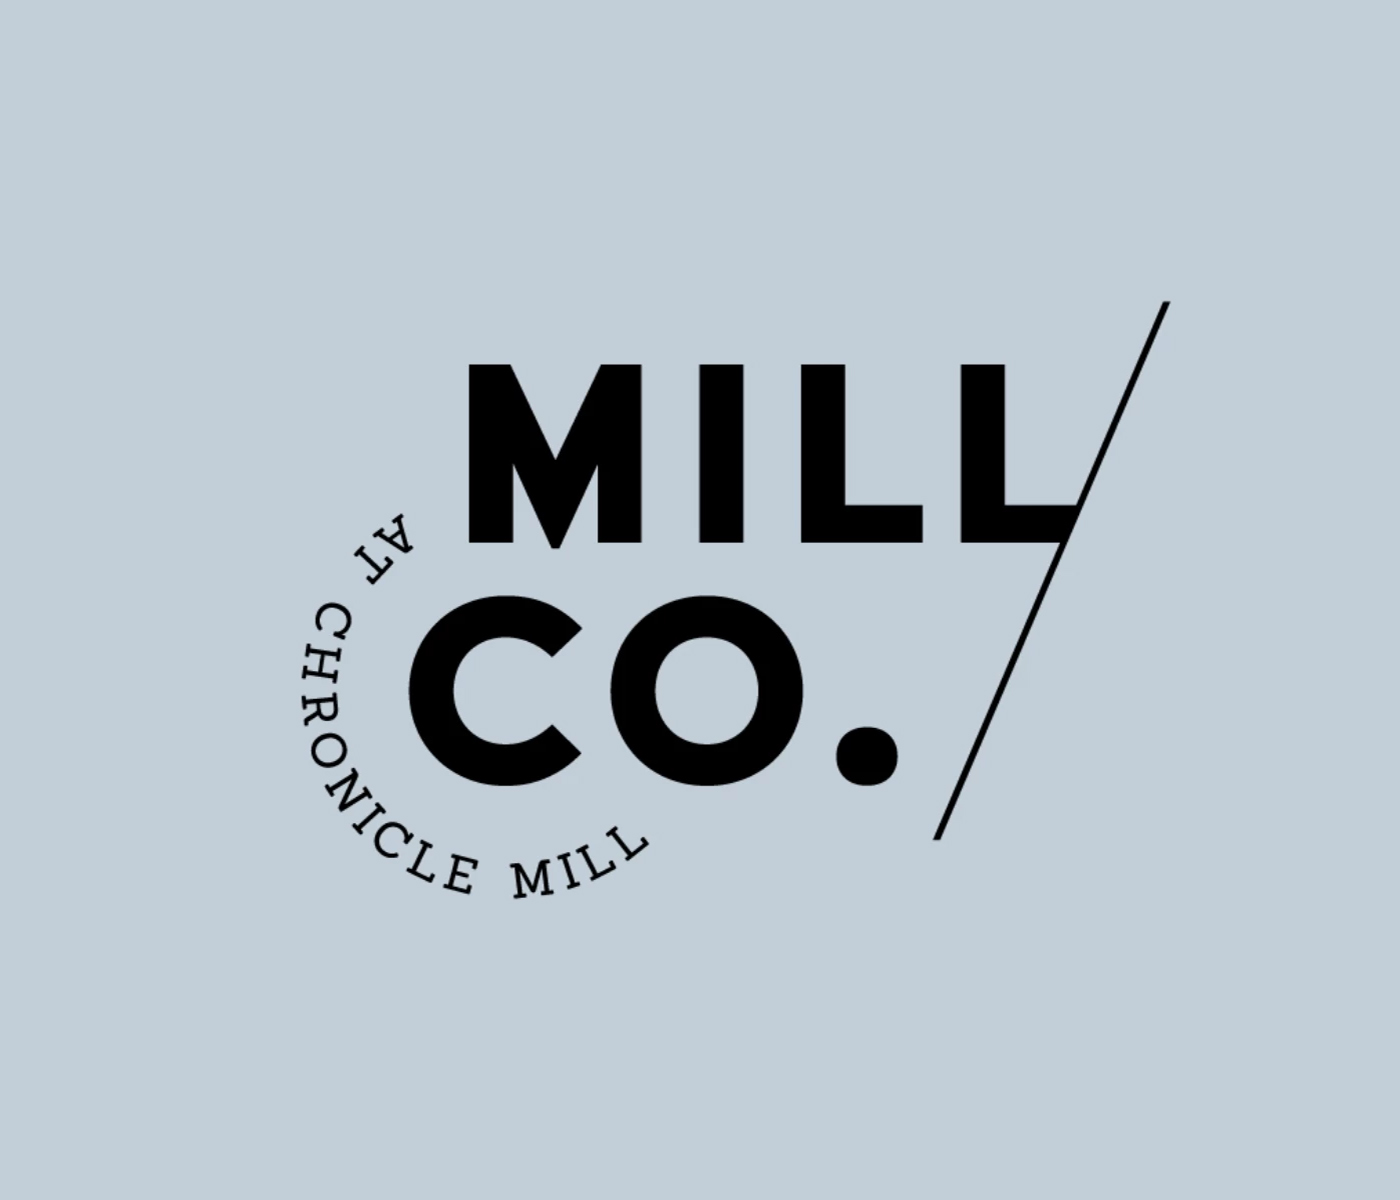 Mill Co. at Chronicle Mill Logo